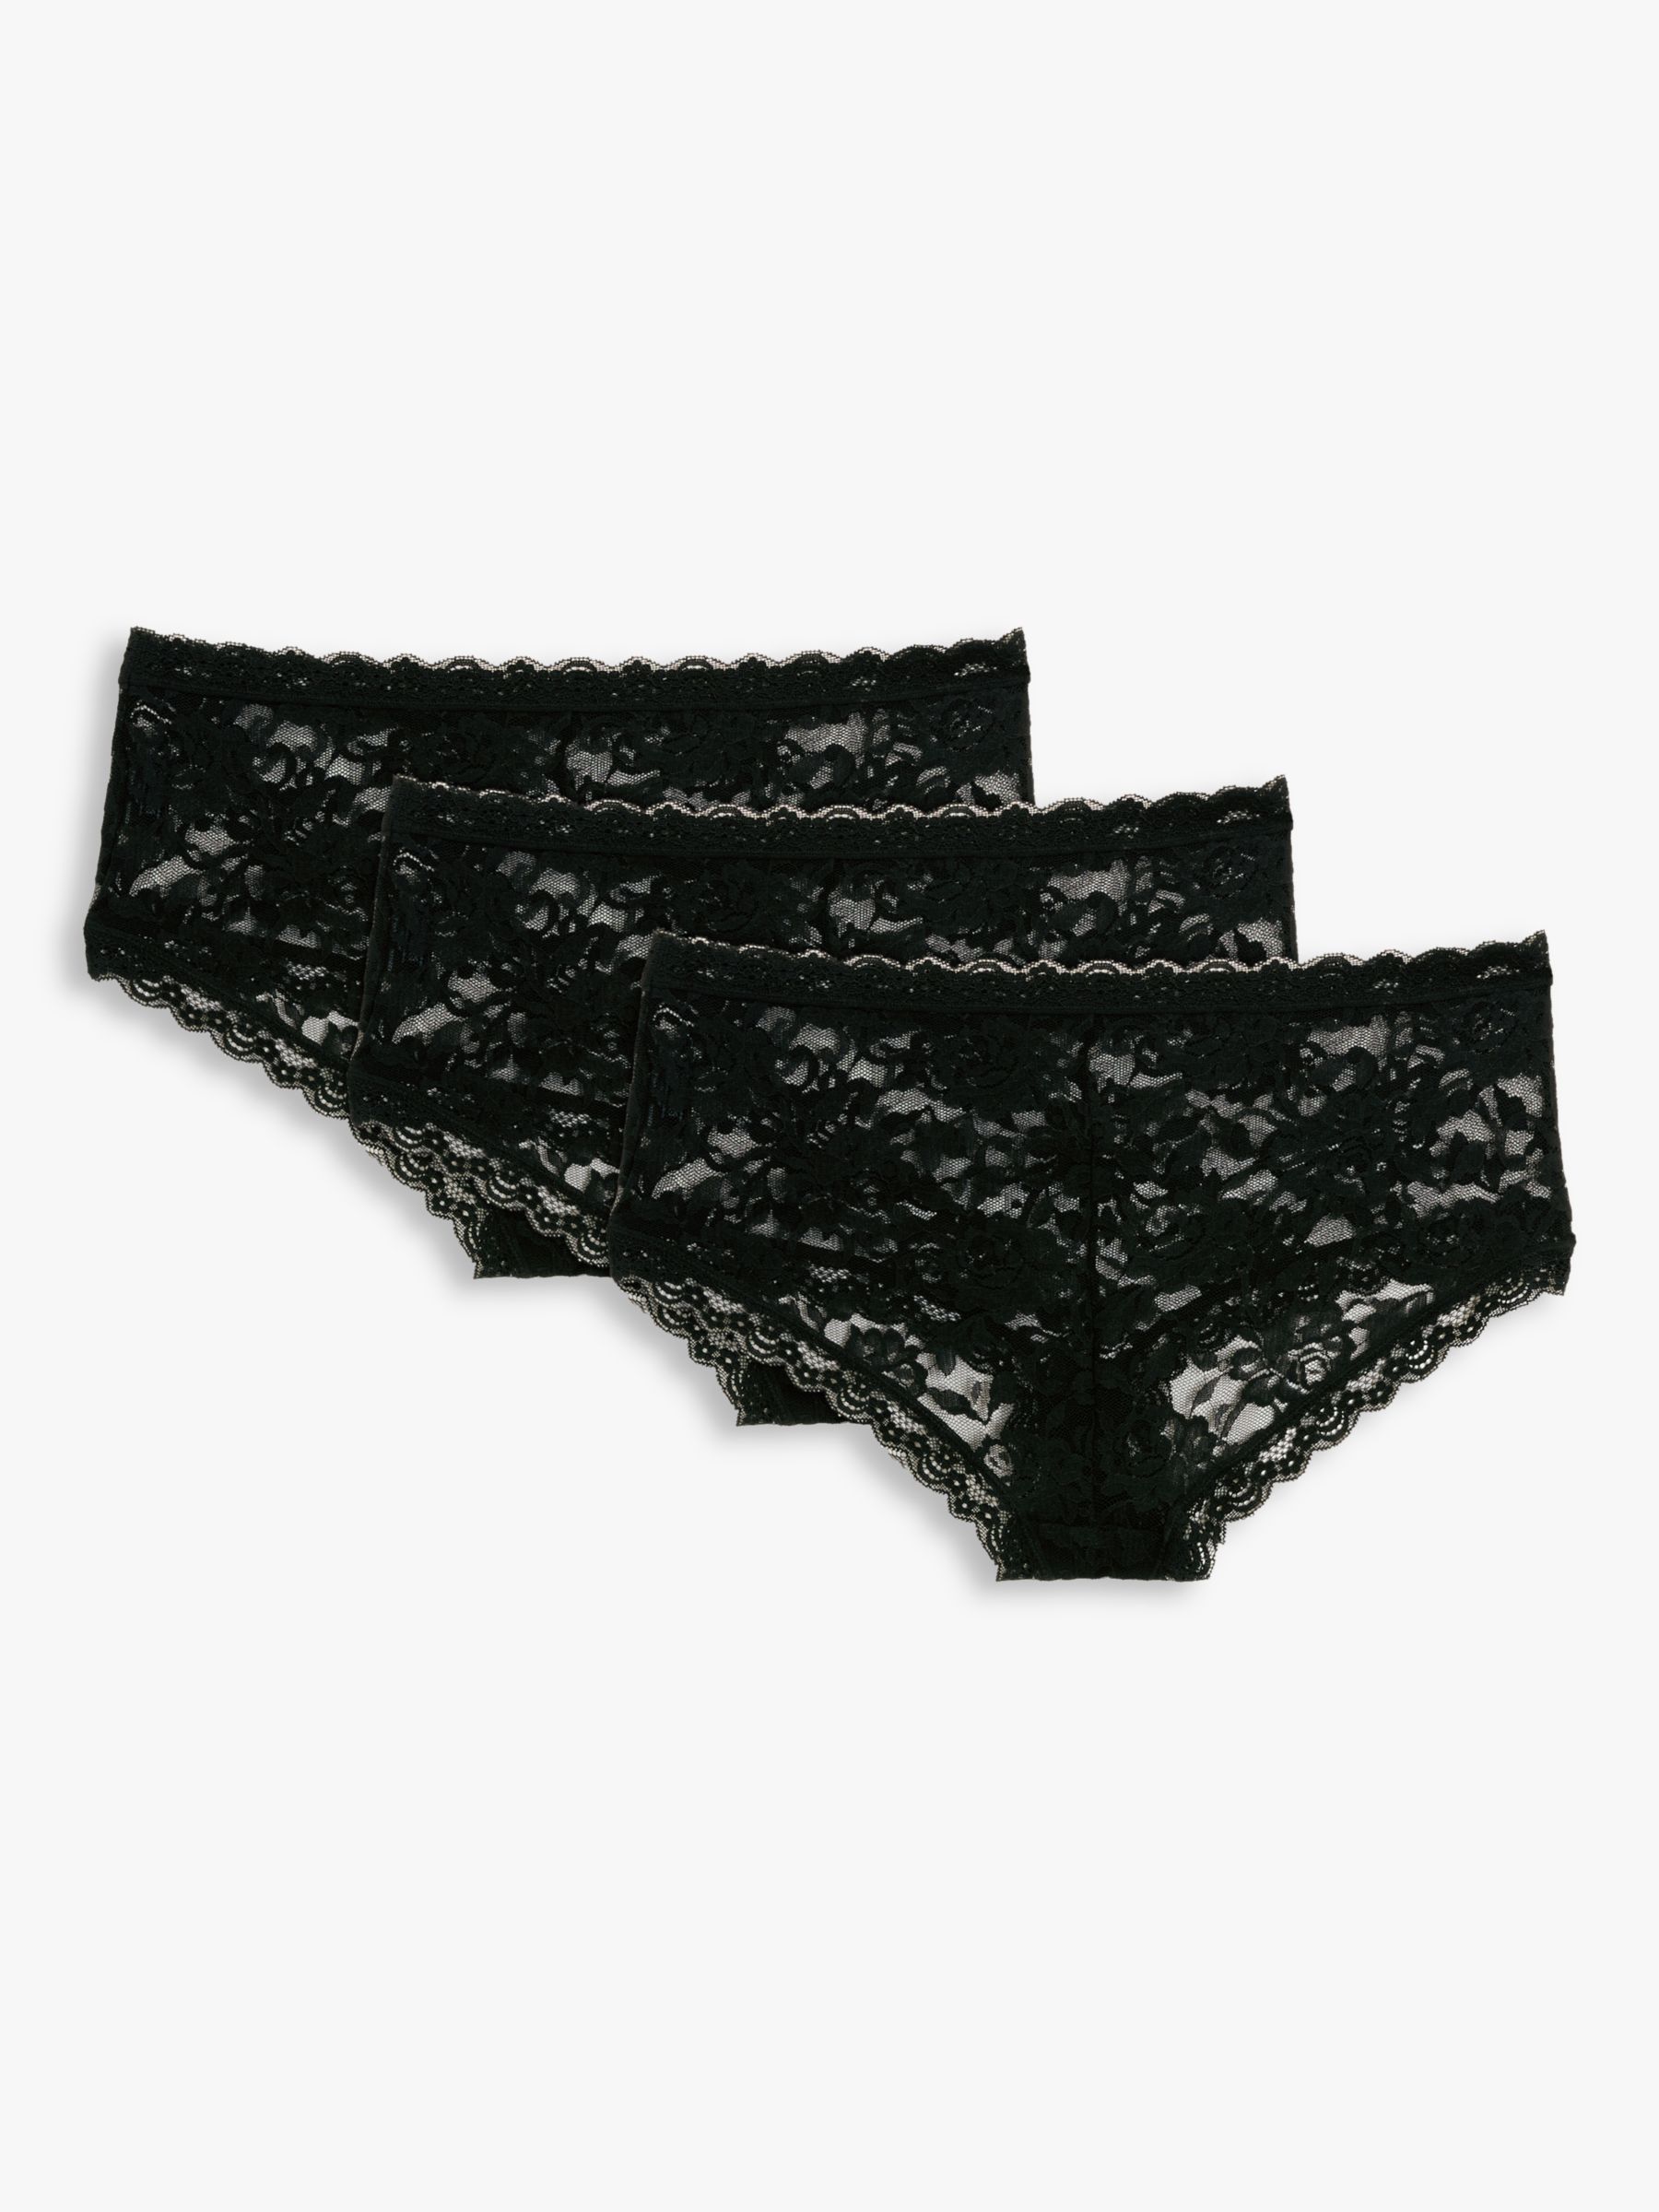 John Lewis ANYDAY Helenca Lace Short Knickers, Pack of 3, Black, 8